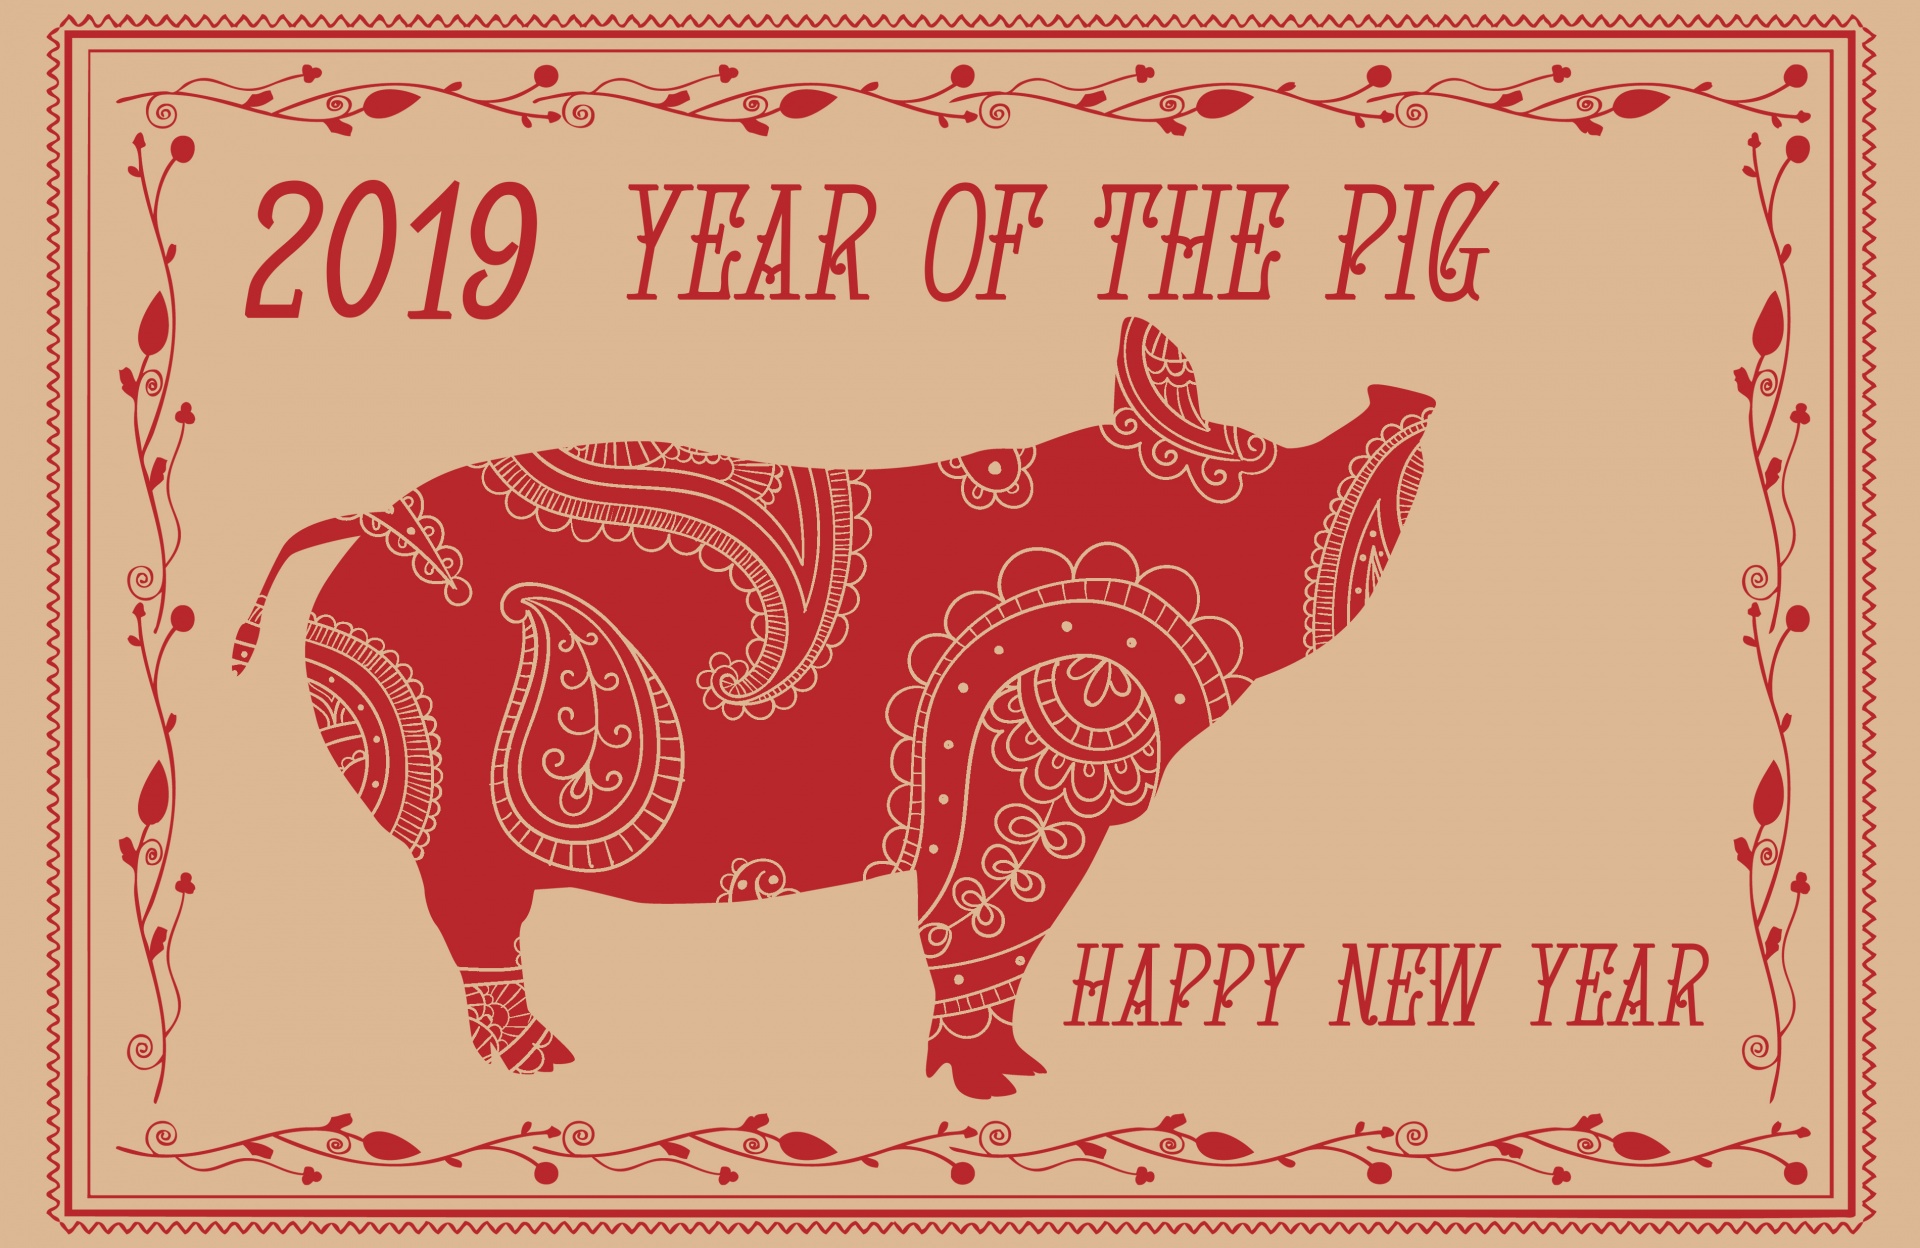 Happy Year of the Pig